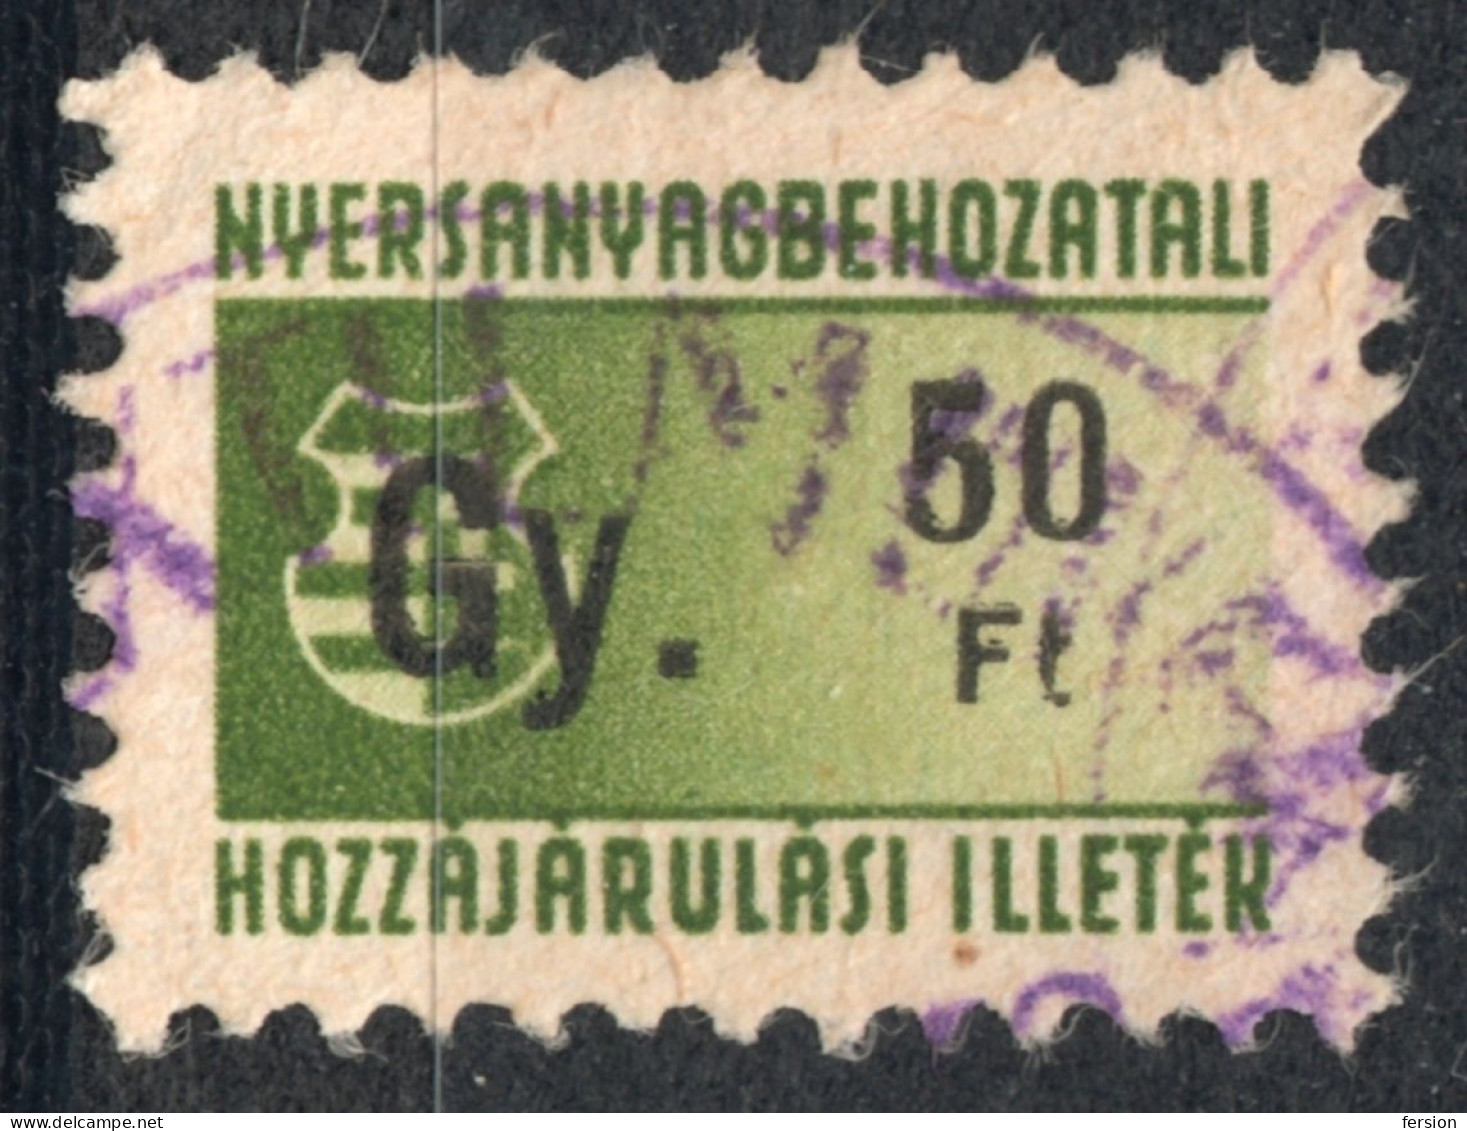 1948 Hungary - Wool Import Tax -  FISCAL BILL - Revenue Stamp - 50 Ft - Used - RR! - KOSSUTH Coat Of Arms - Fiscales